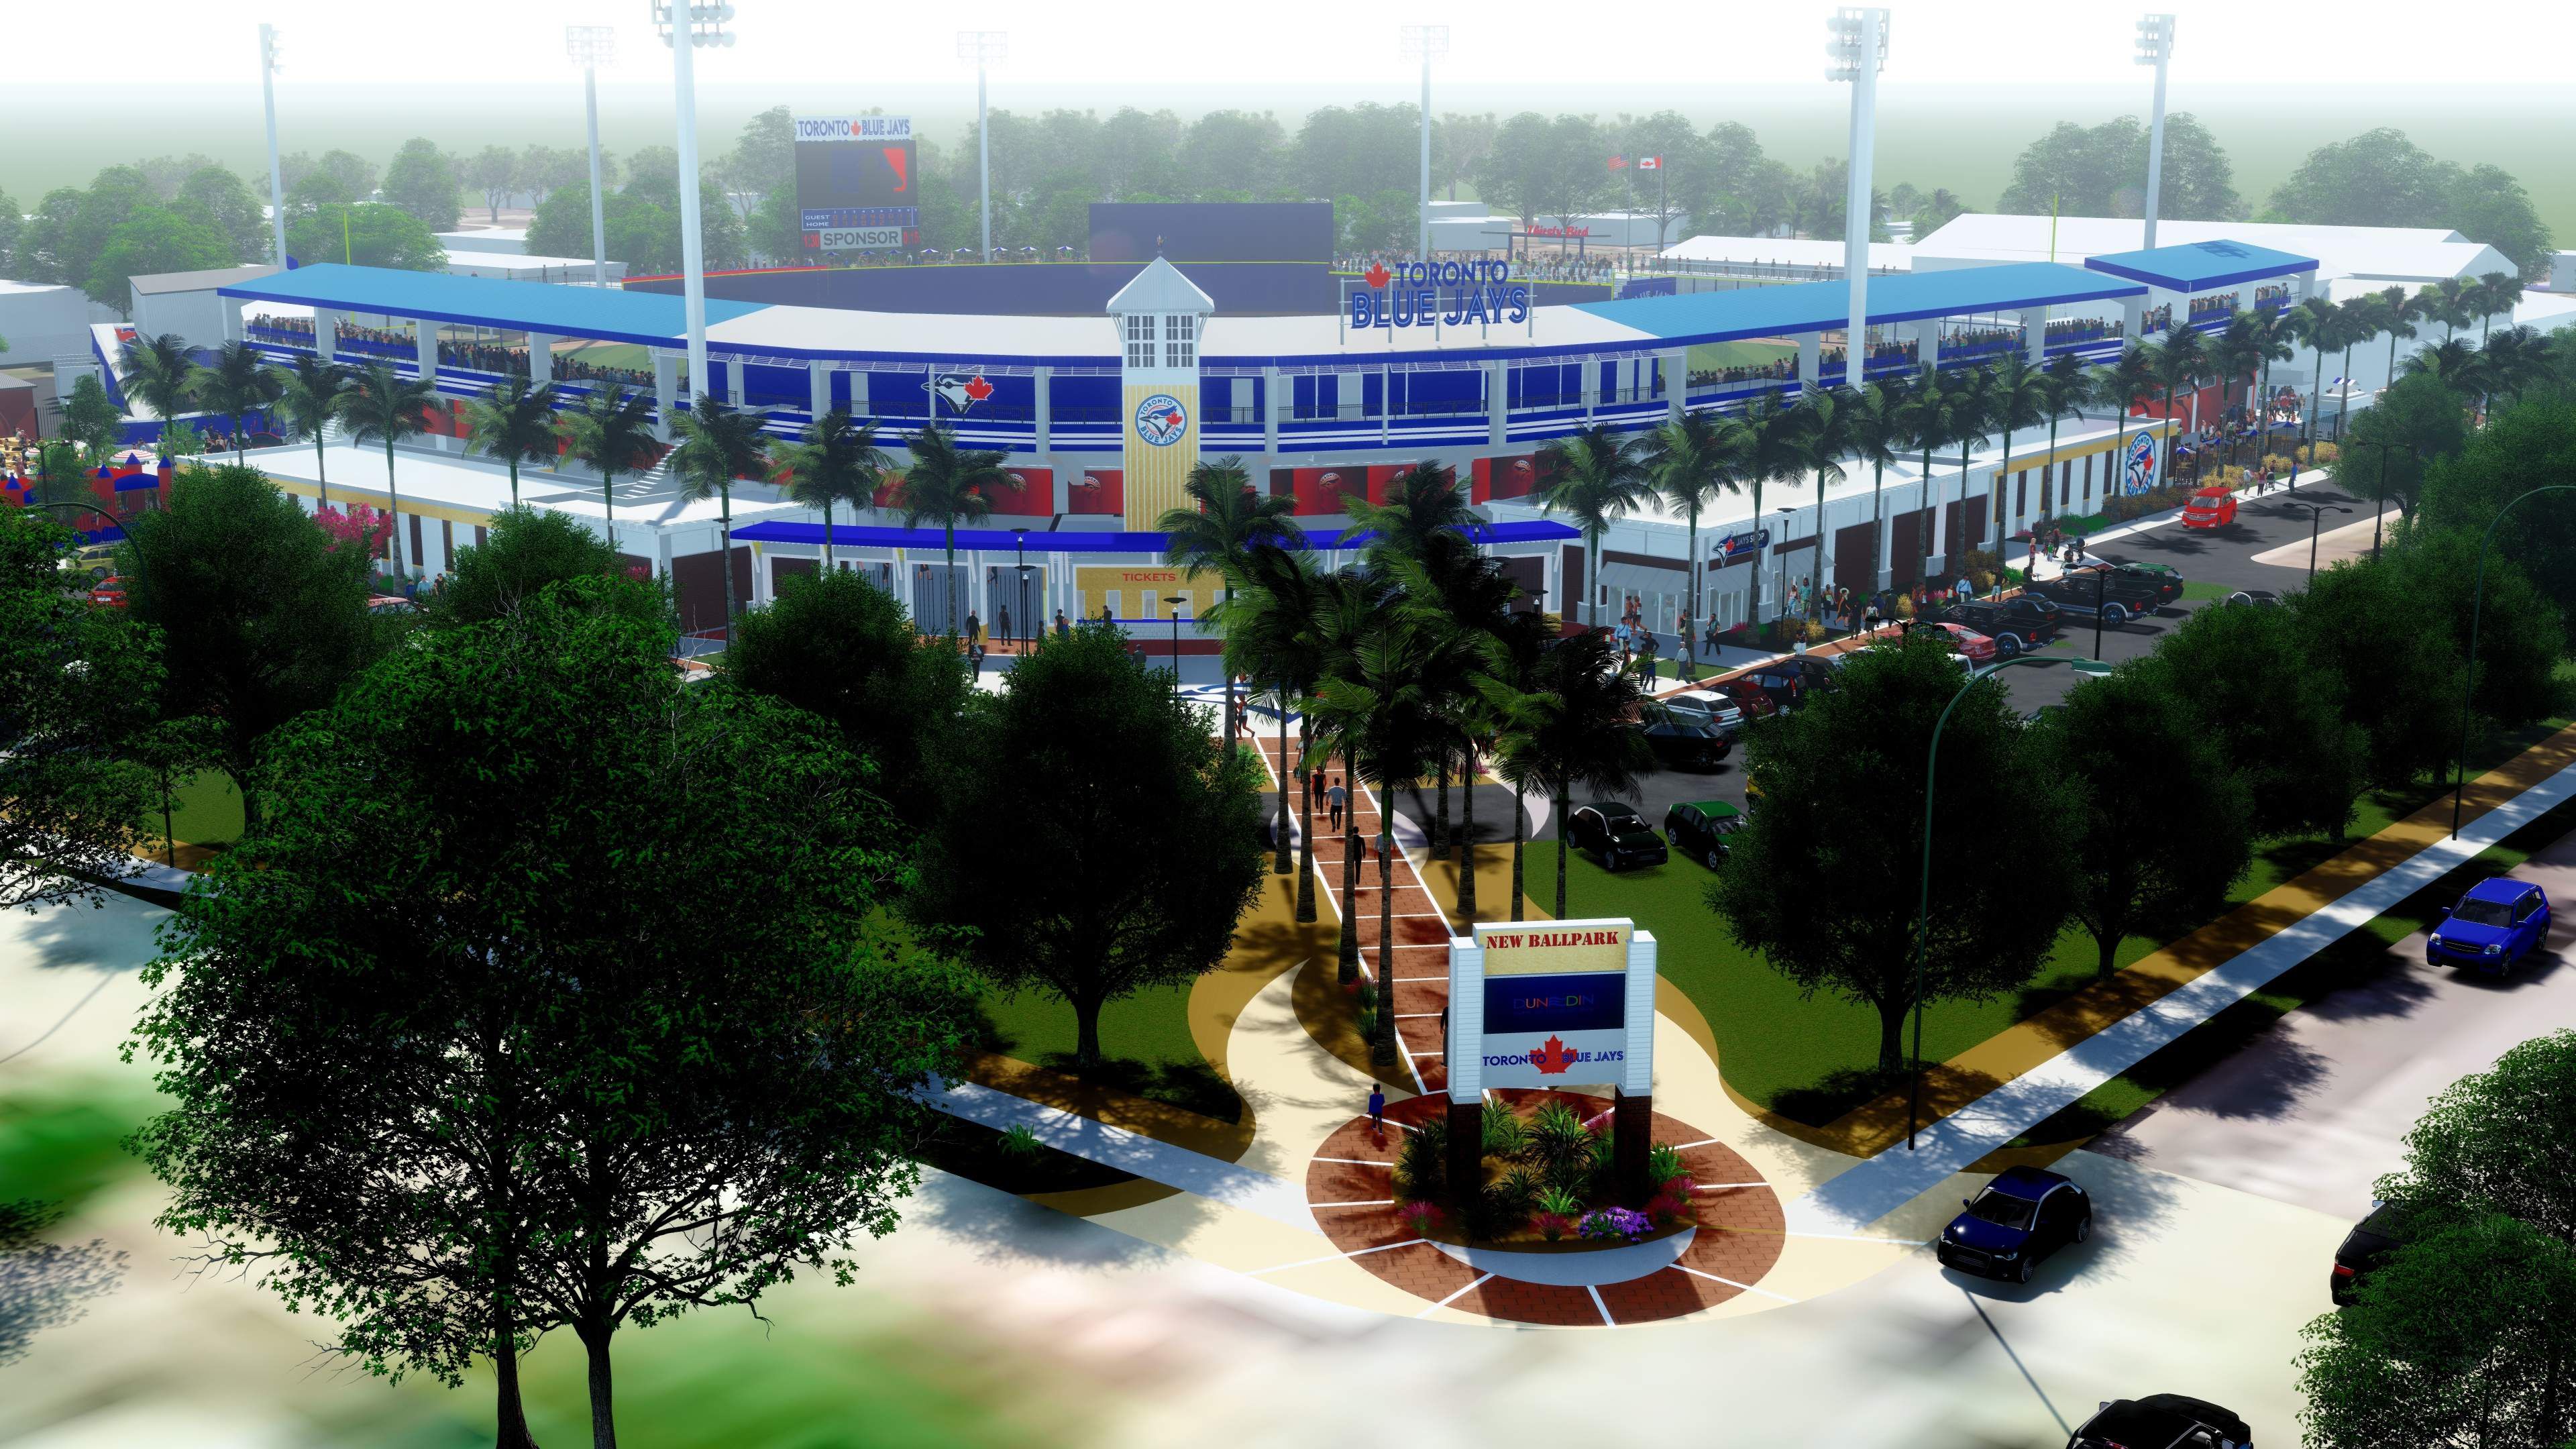 Blue Jays to open innovative spring training facility in 2020 (PHOTOS)